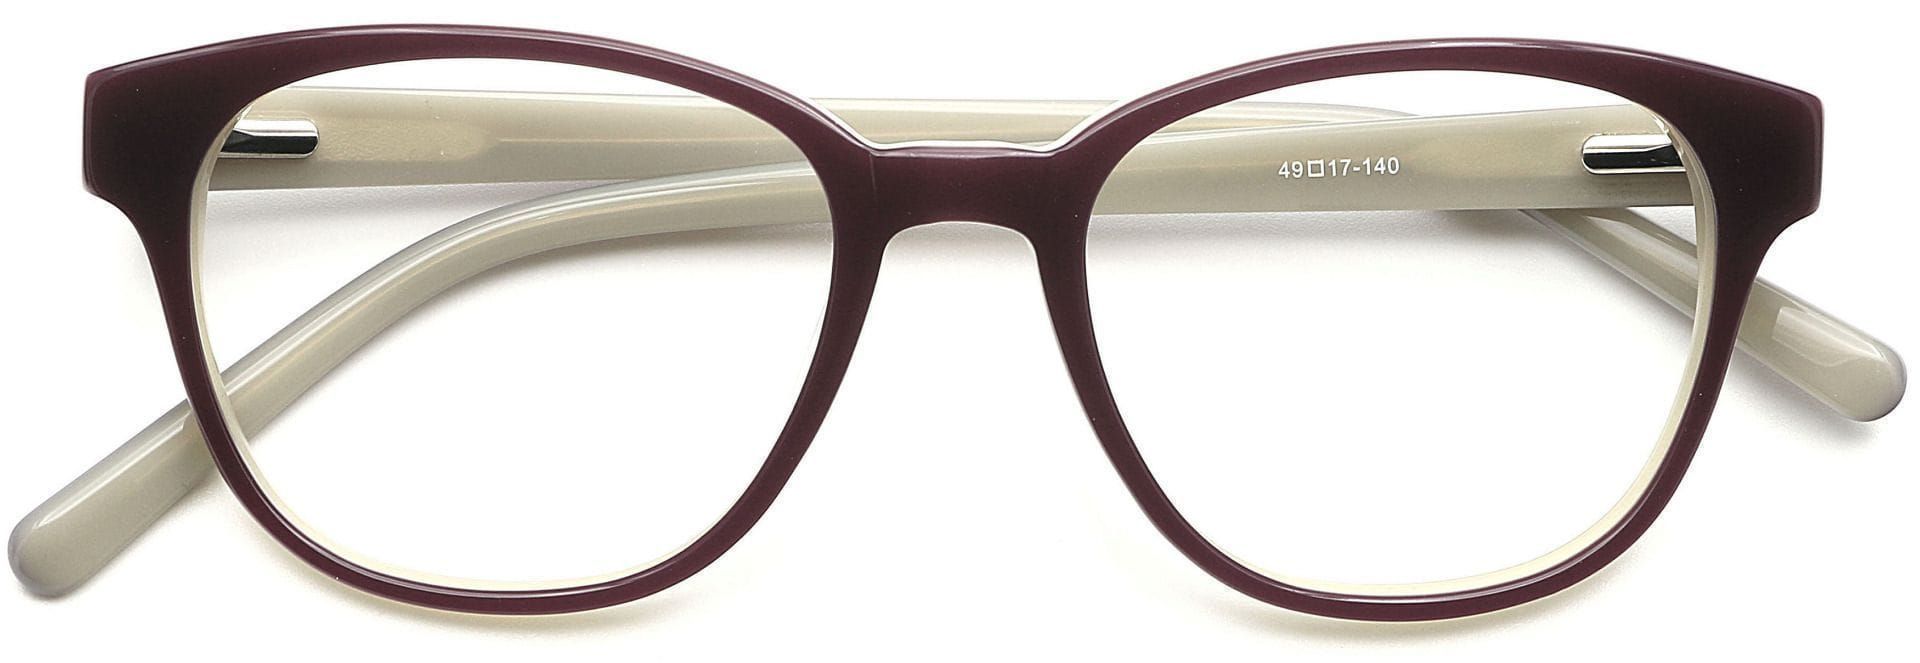 Pinnacle Classic Square Reading Glasses - Brown